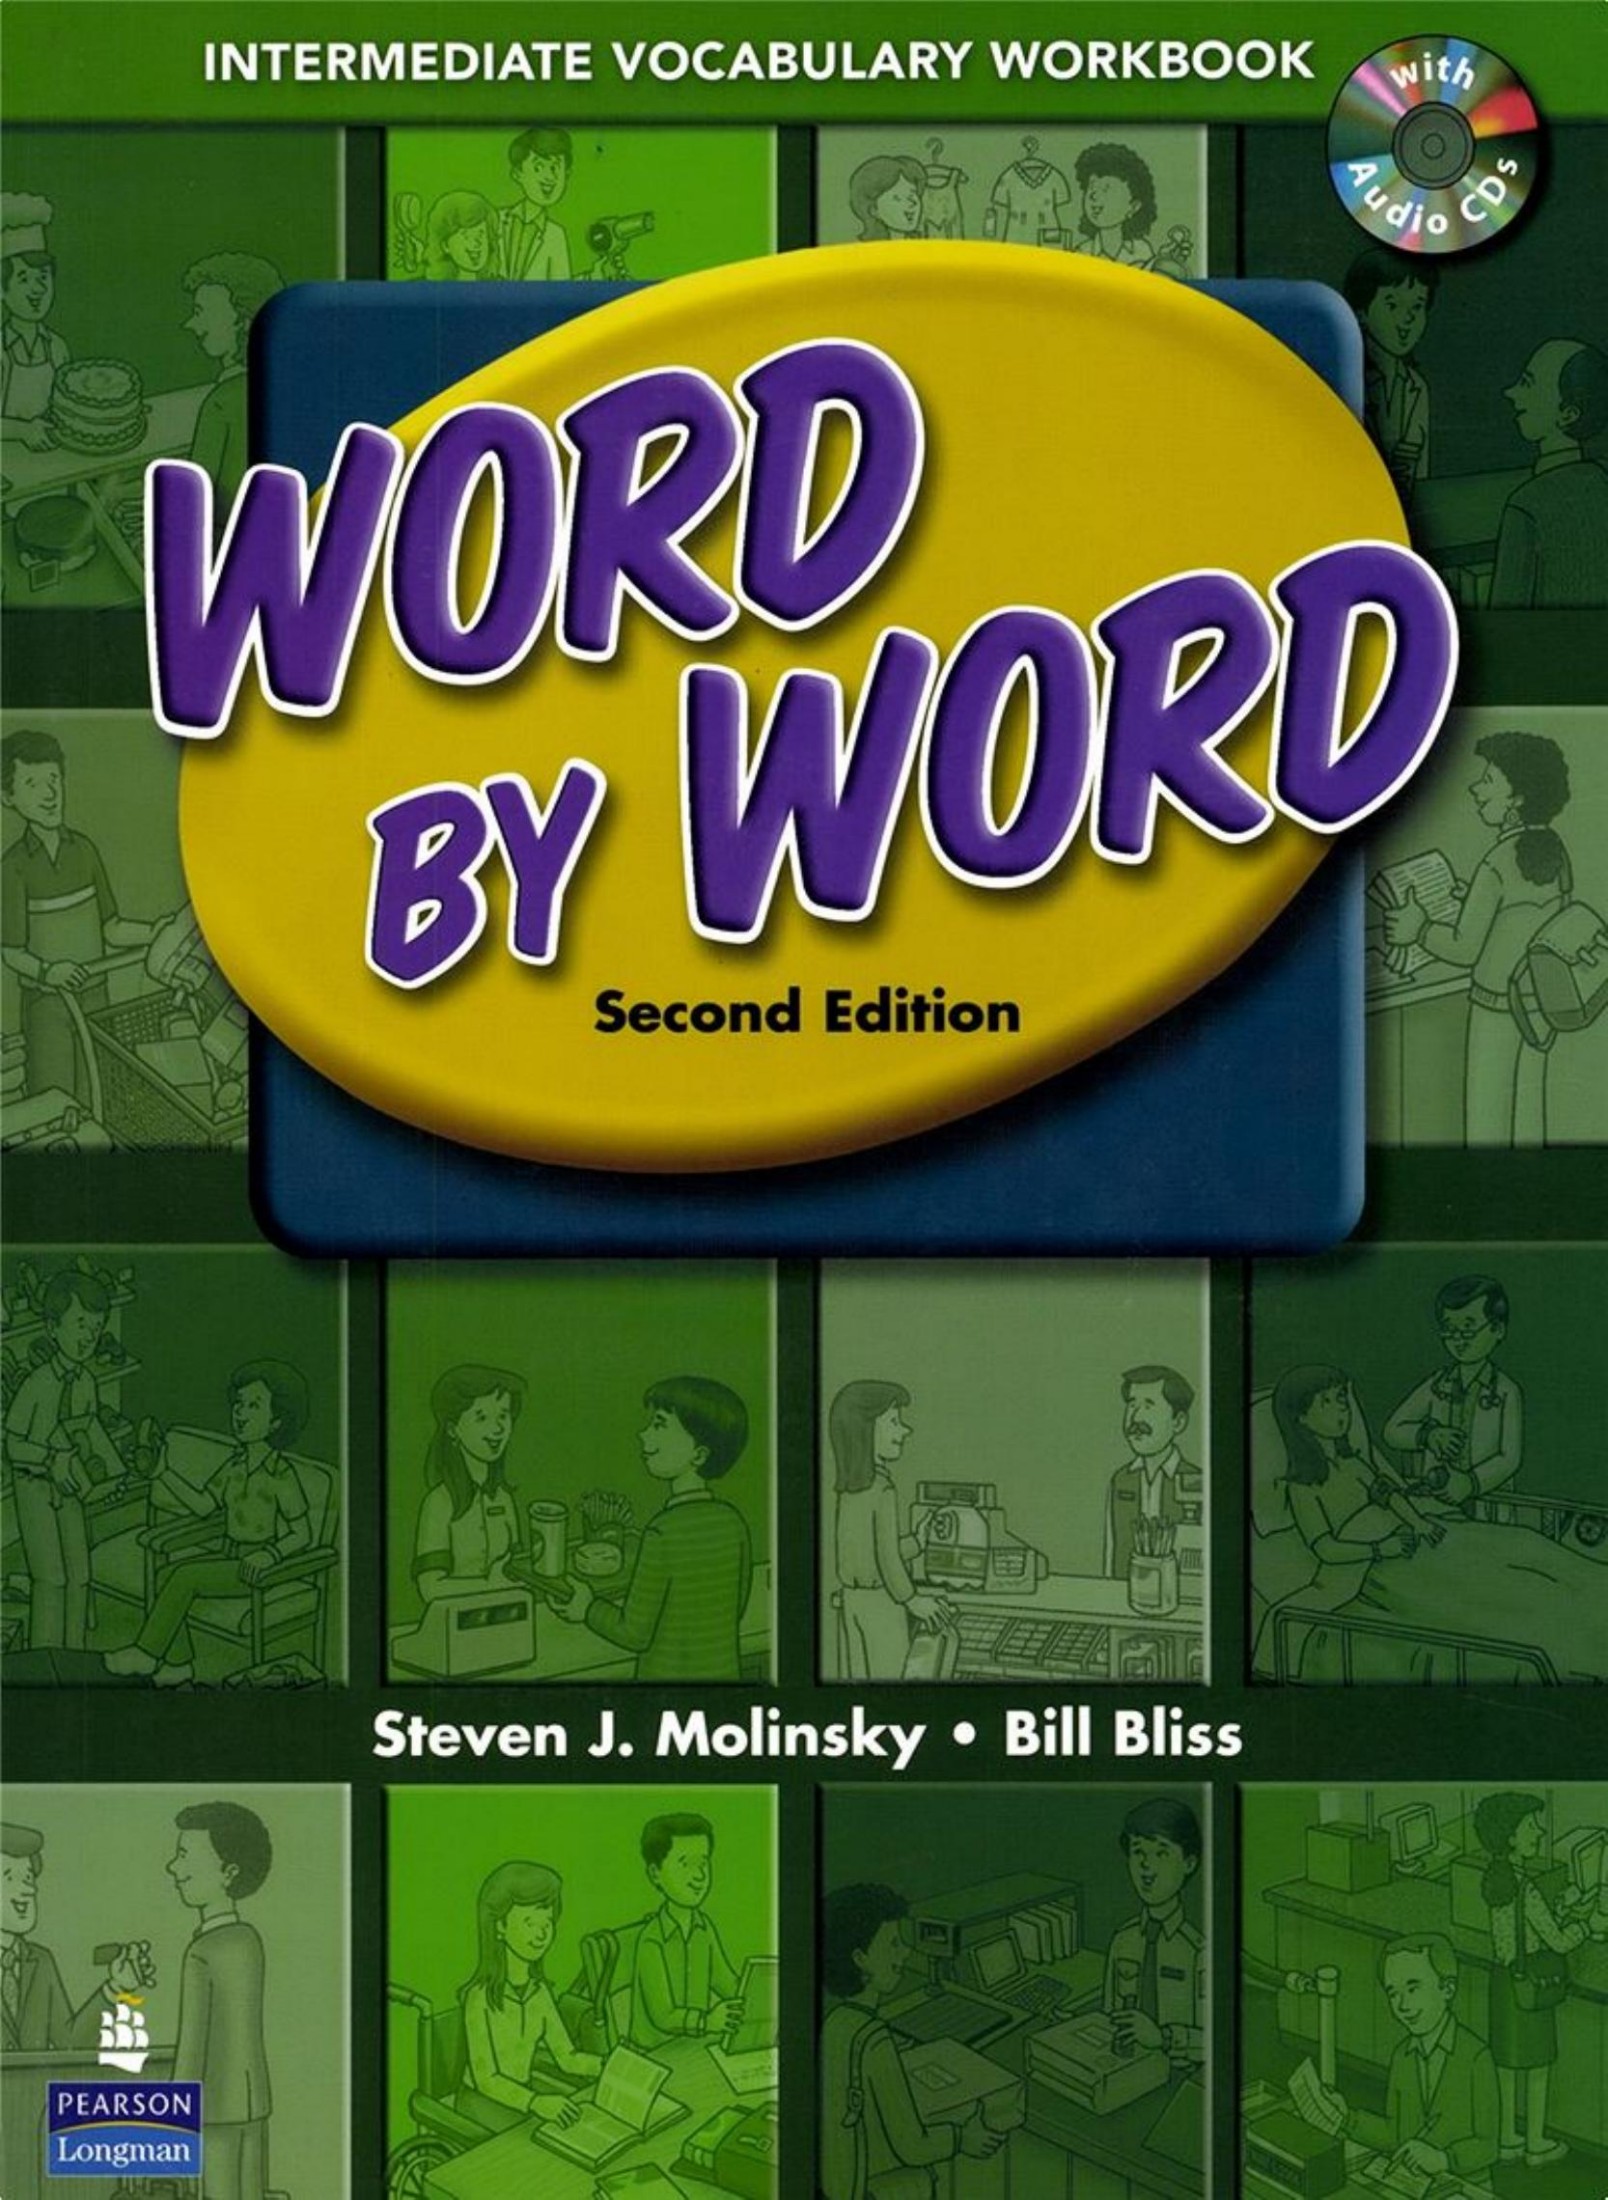 Word By Word Picture Dictionary  Intermediate Vocabulary Workbook w Audio CD 2nd Edition Steven J. Molinsky 172p_0131892304